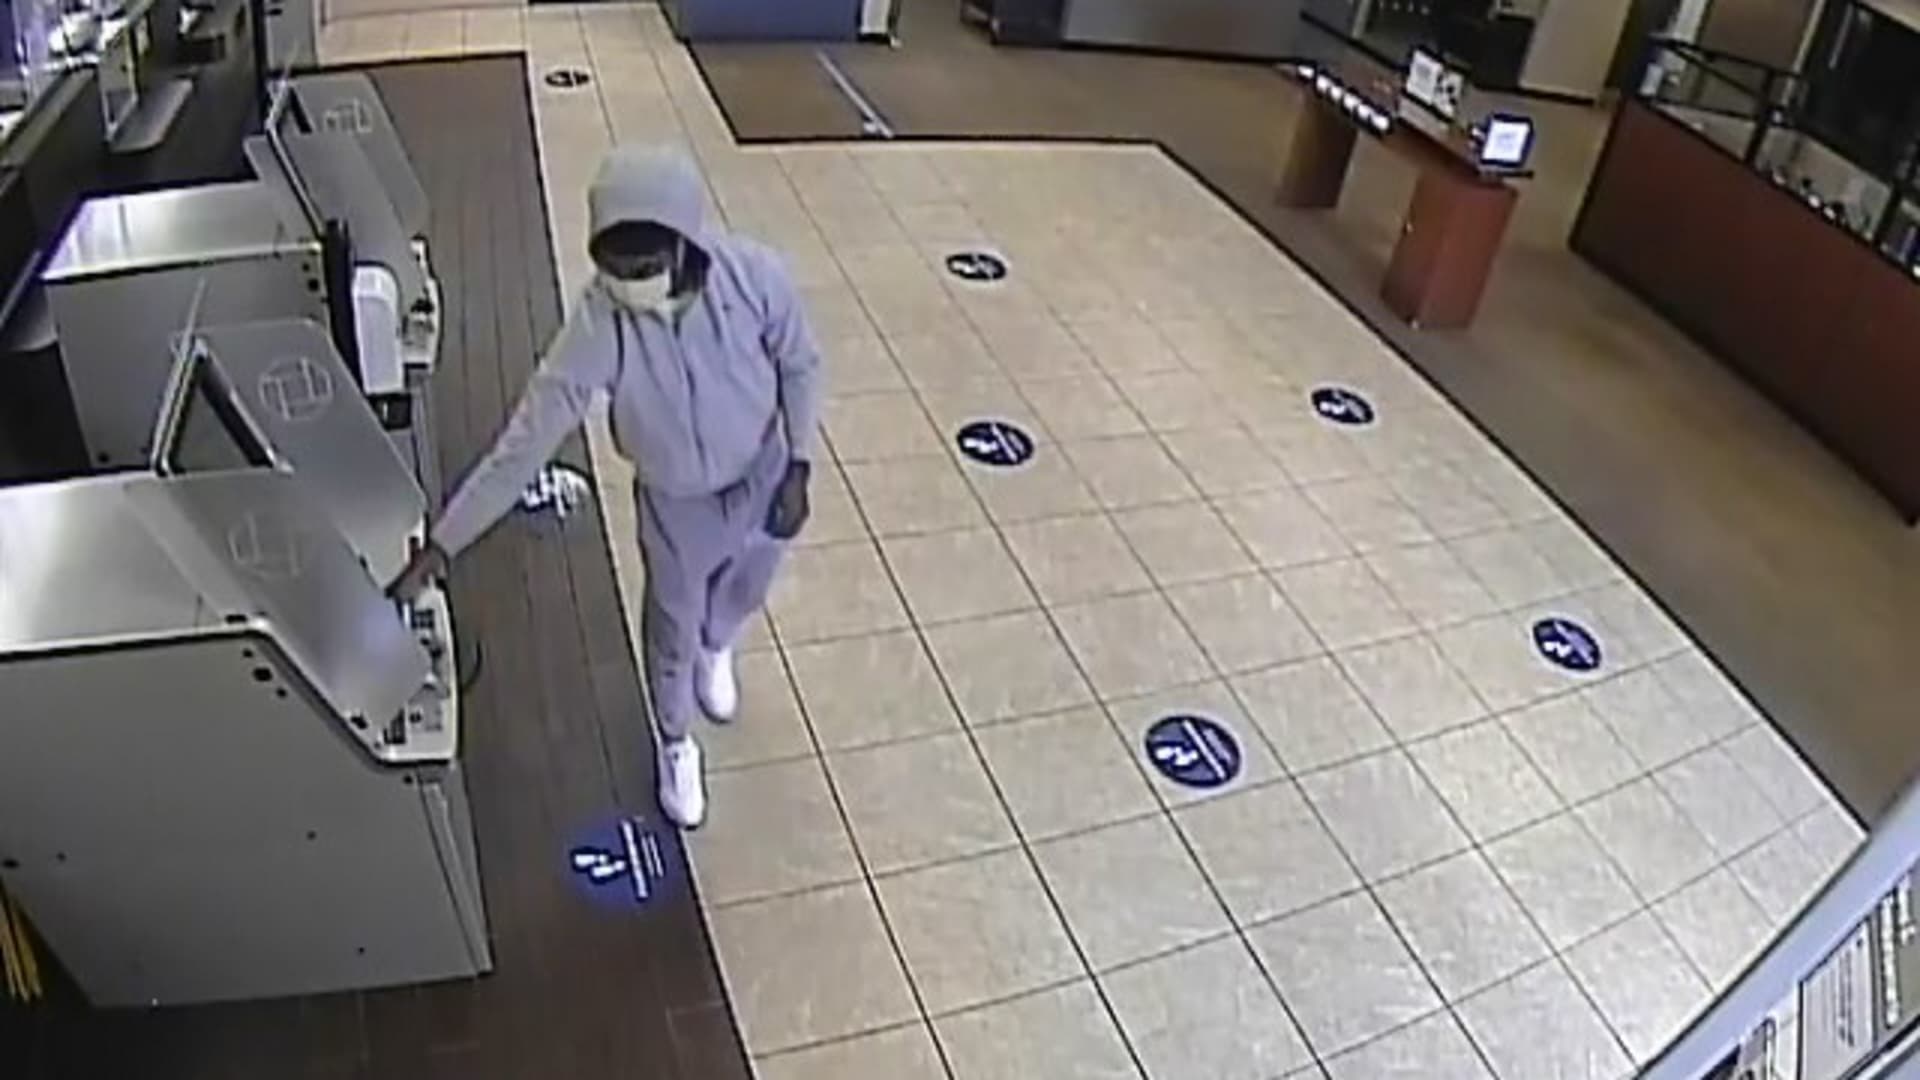 Security video shows a suspected fraudster trying to take money out of an ATM in a Chase bank in Boca Raton, Florida.